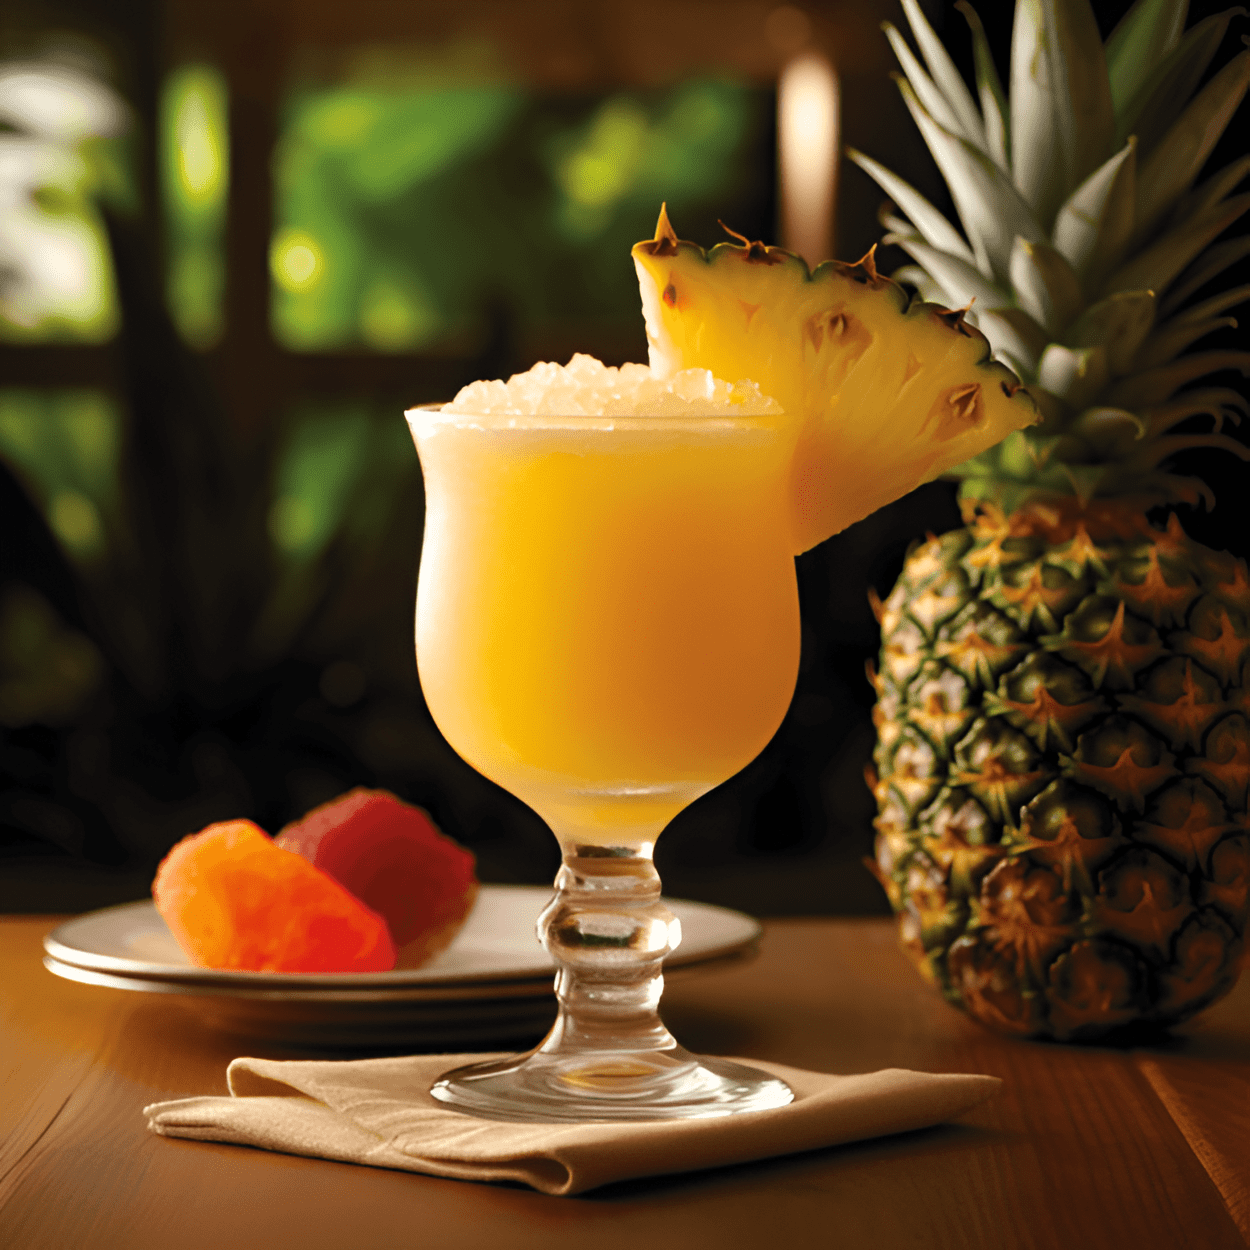 Pineapple Daiquiri Cocktail Recipe - The Pineapple Daiquiri is a delightful blend of sweet, sour, and strong. The sweetness of the pineapple juice and sugar is balanced by the sourness of the lime juice, while the rum adds a strong, warming kick.